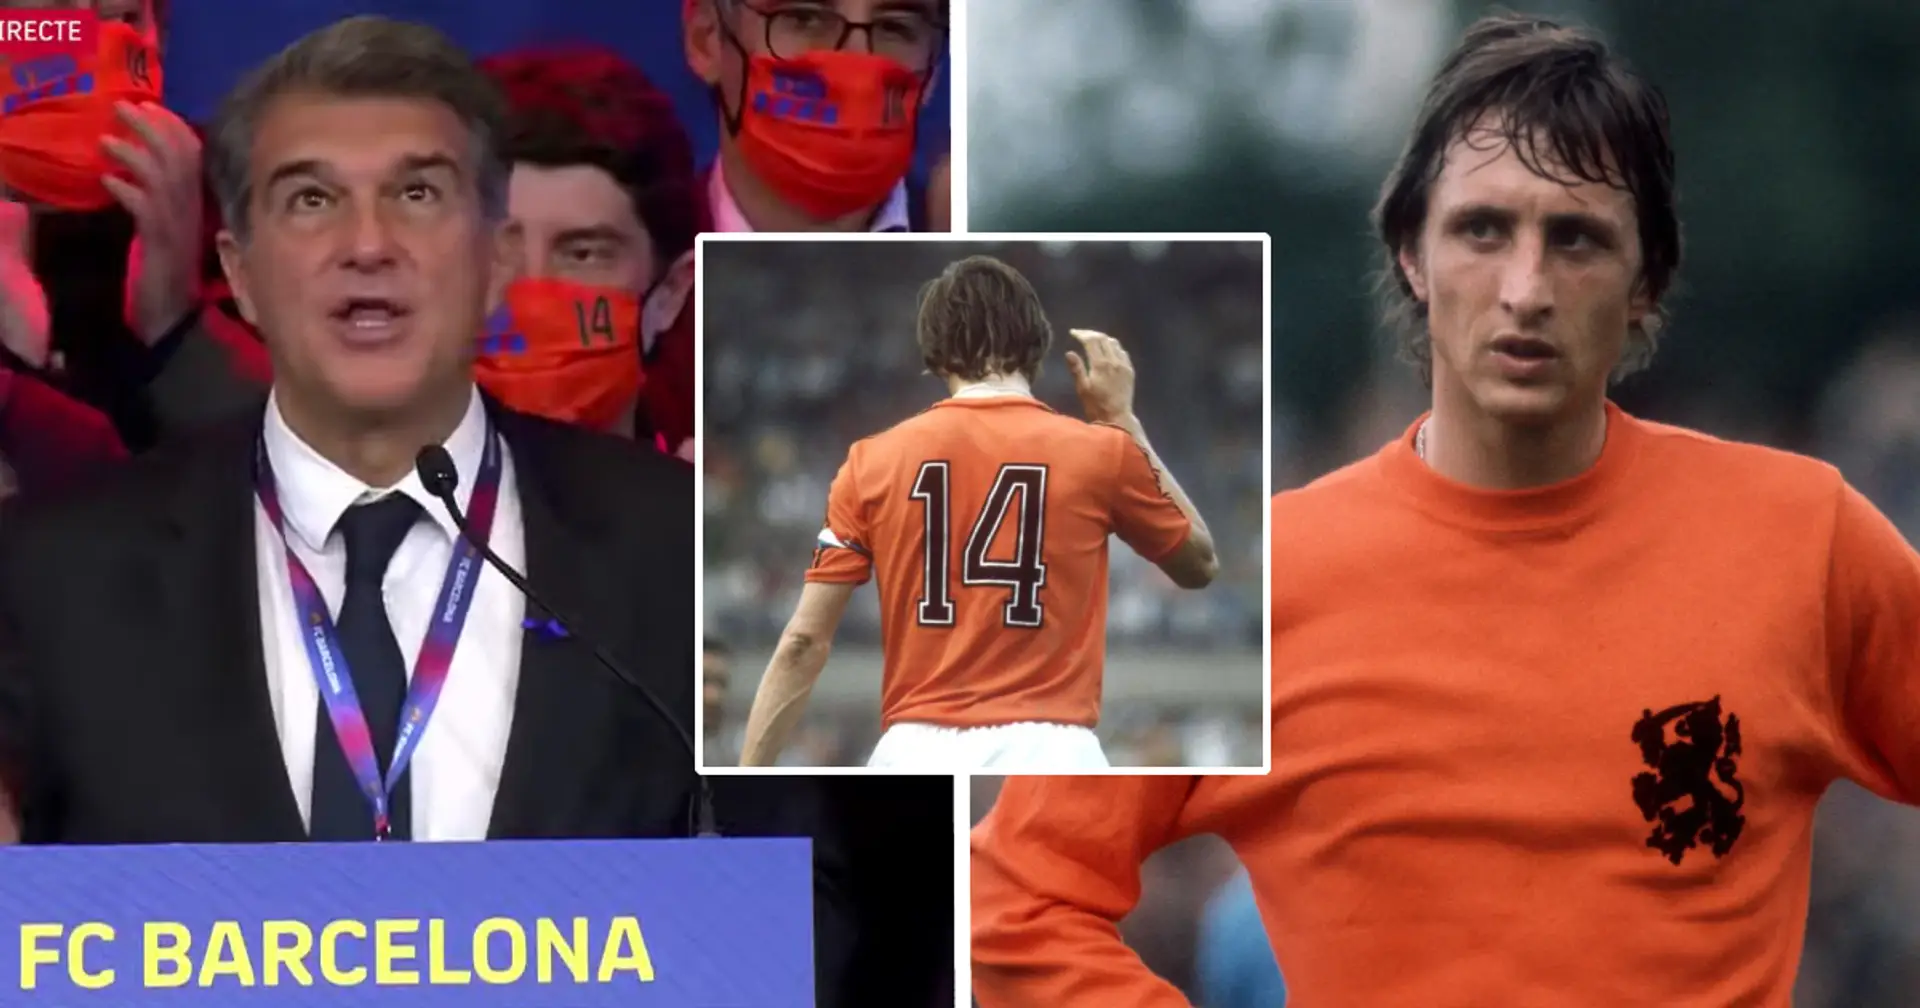 Laporta and his team wearing orange no.14 masks – it is for Johan Cryuff